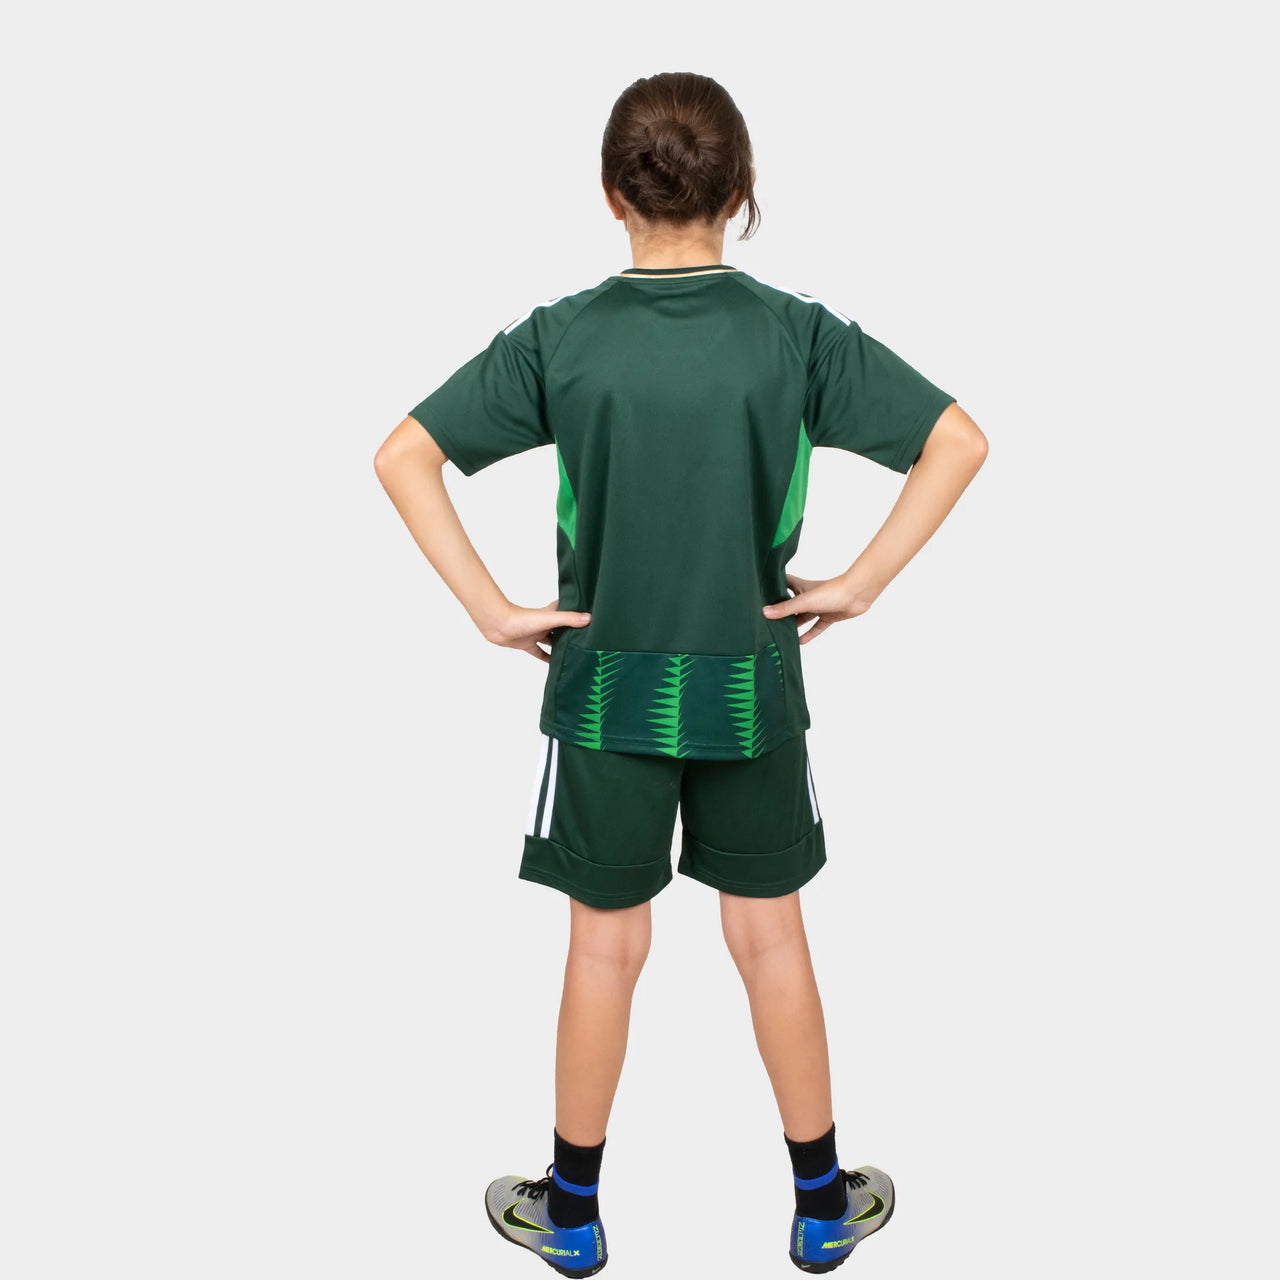 Ksa Kids Kit Home Season 23/24 Designed By Mitani Store , Regular Fit Jersey Short Sleeves And V-Neck Collar In Green Color